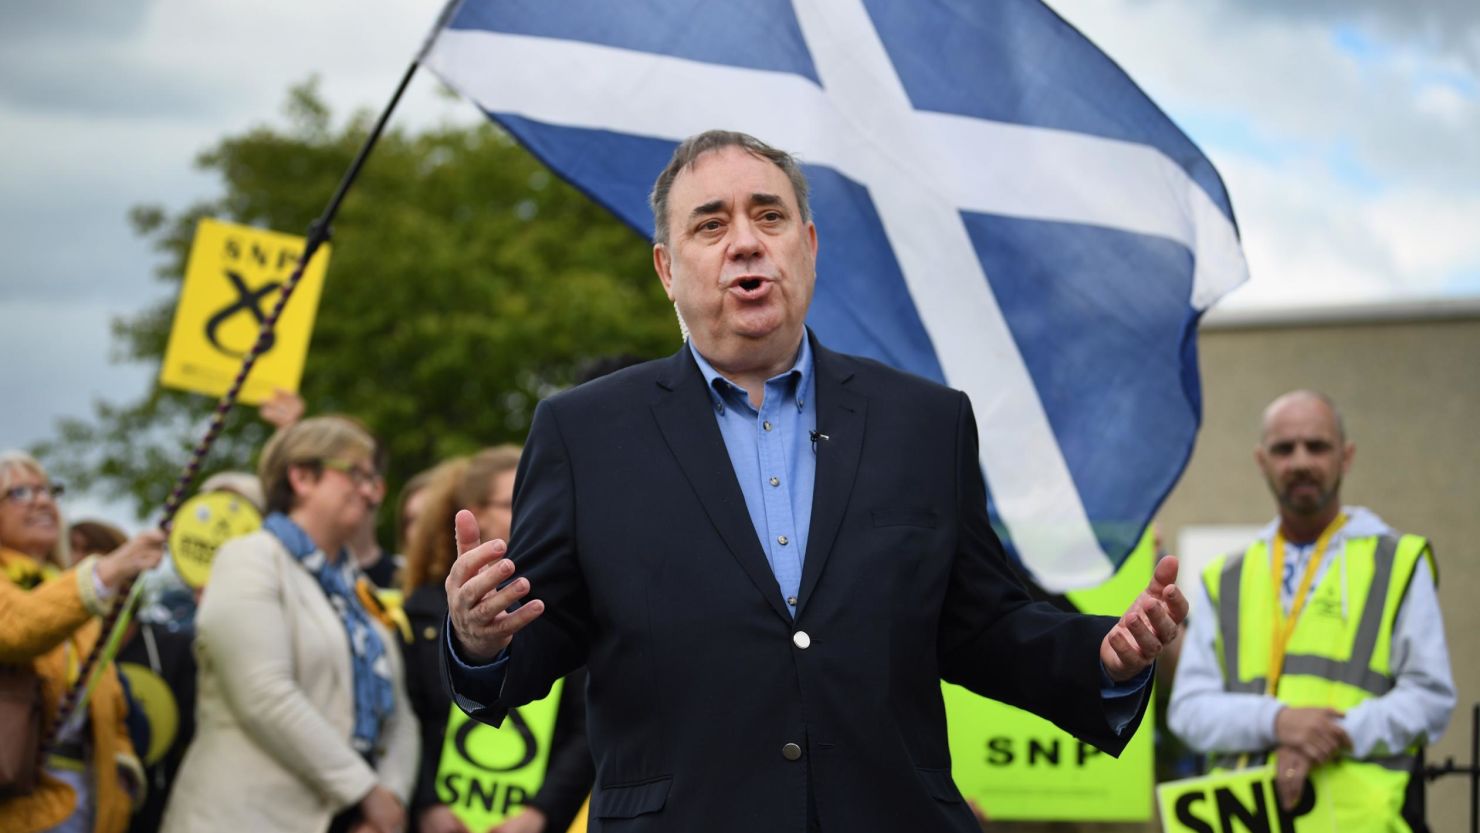 Alex Salmond seen on the campaign trail in Broomhouse on May 18, 2017 in Edinburgh, Scotland.